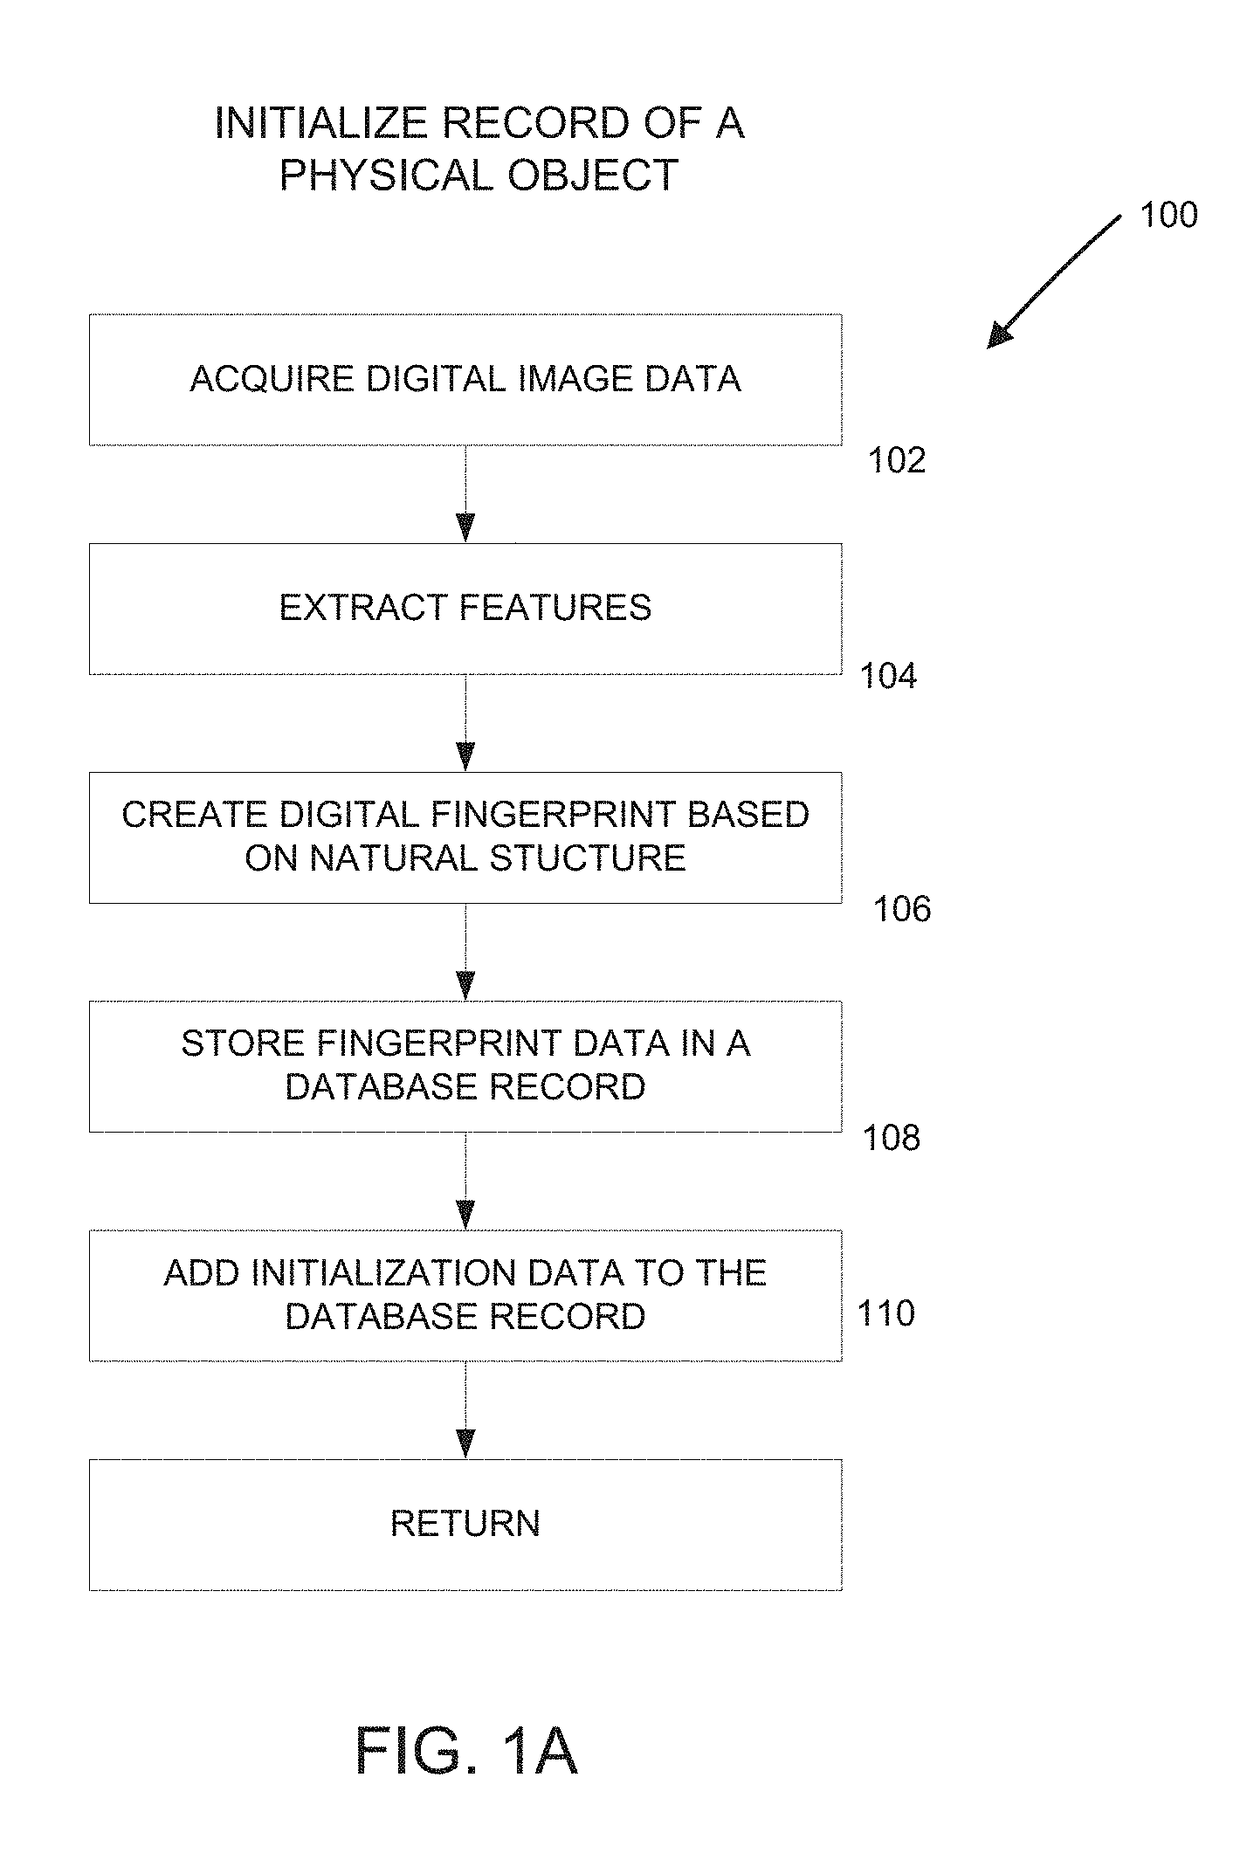 Centralized databases storing digital fingerprints of objects for collaborative authentication